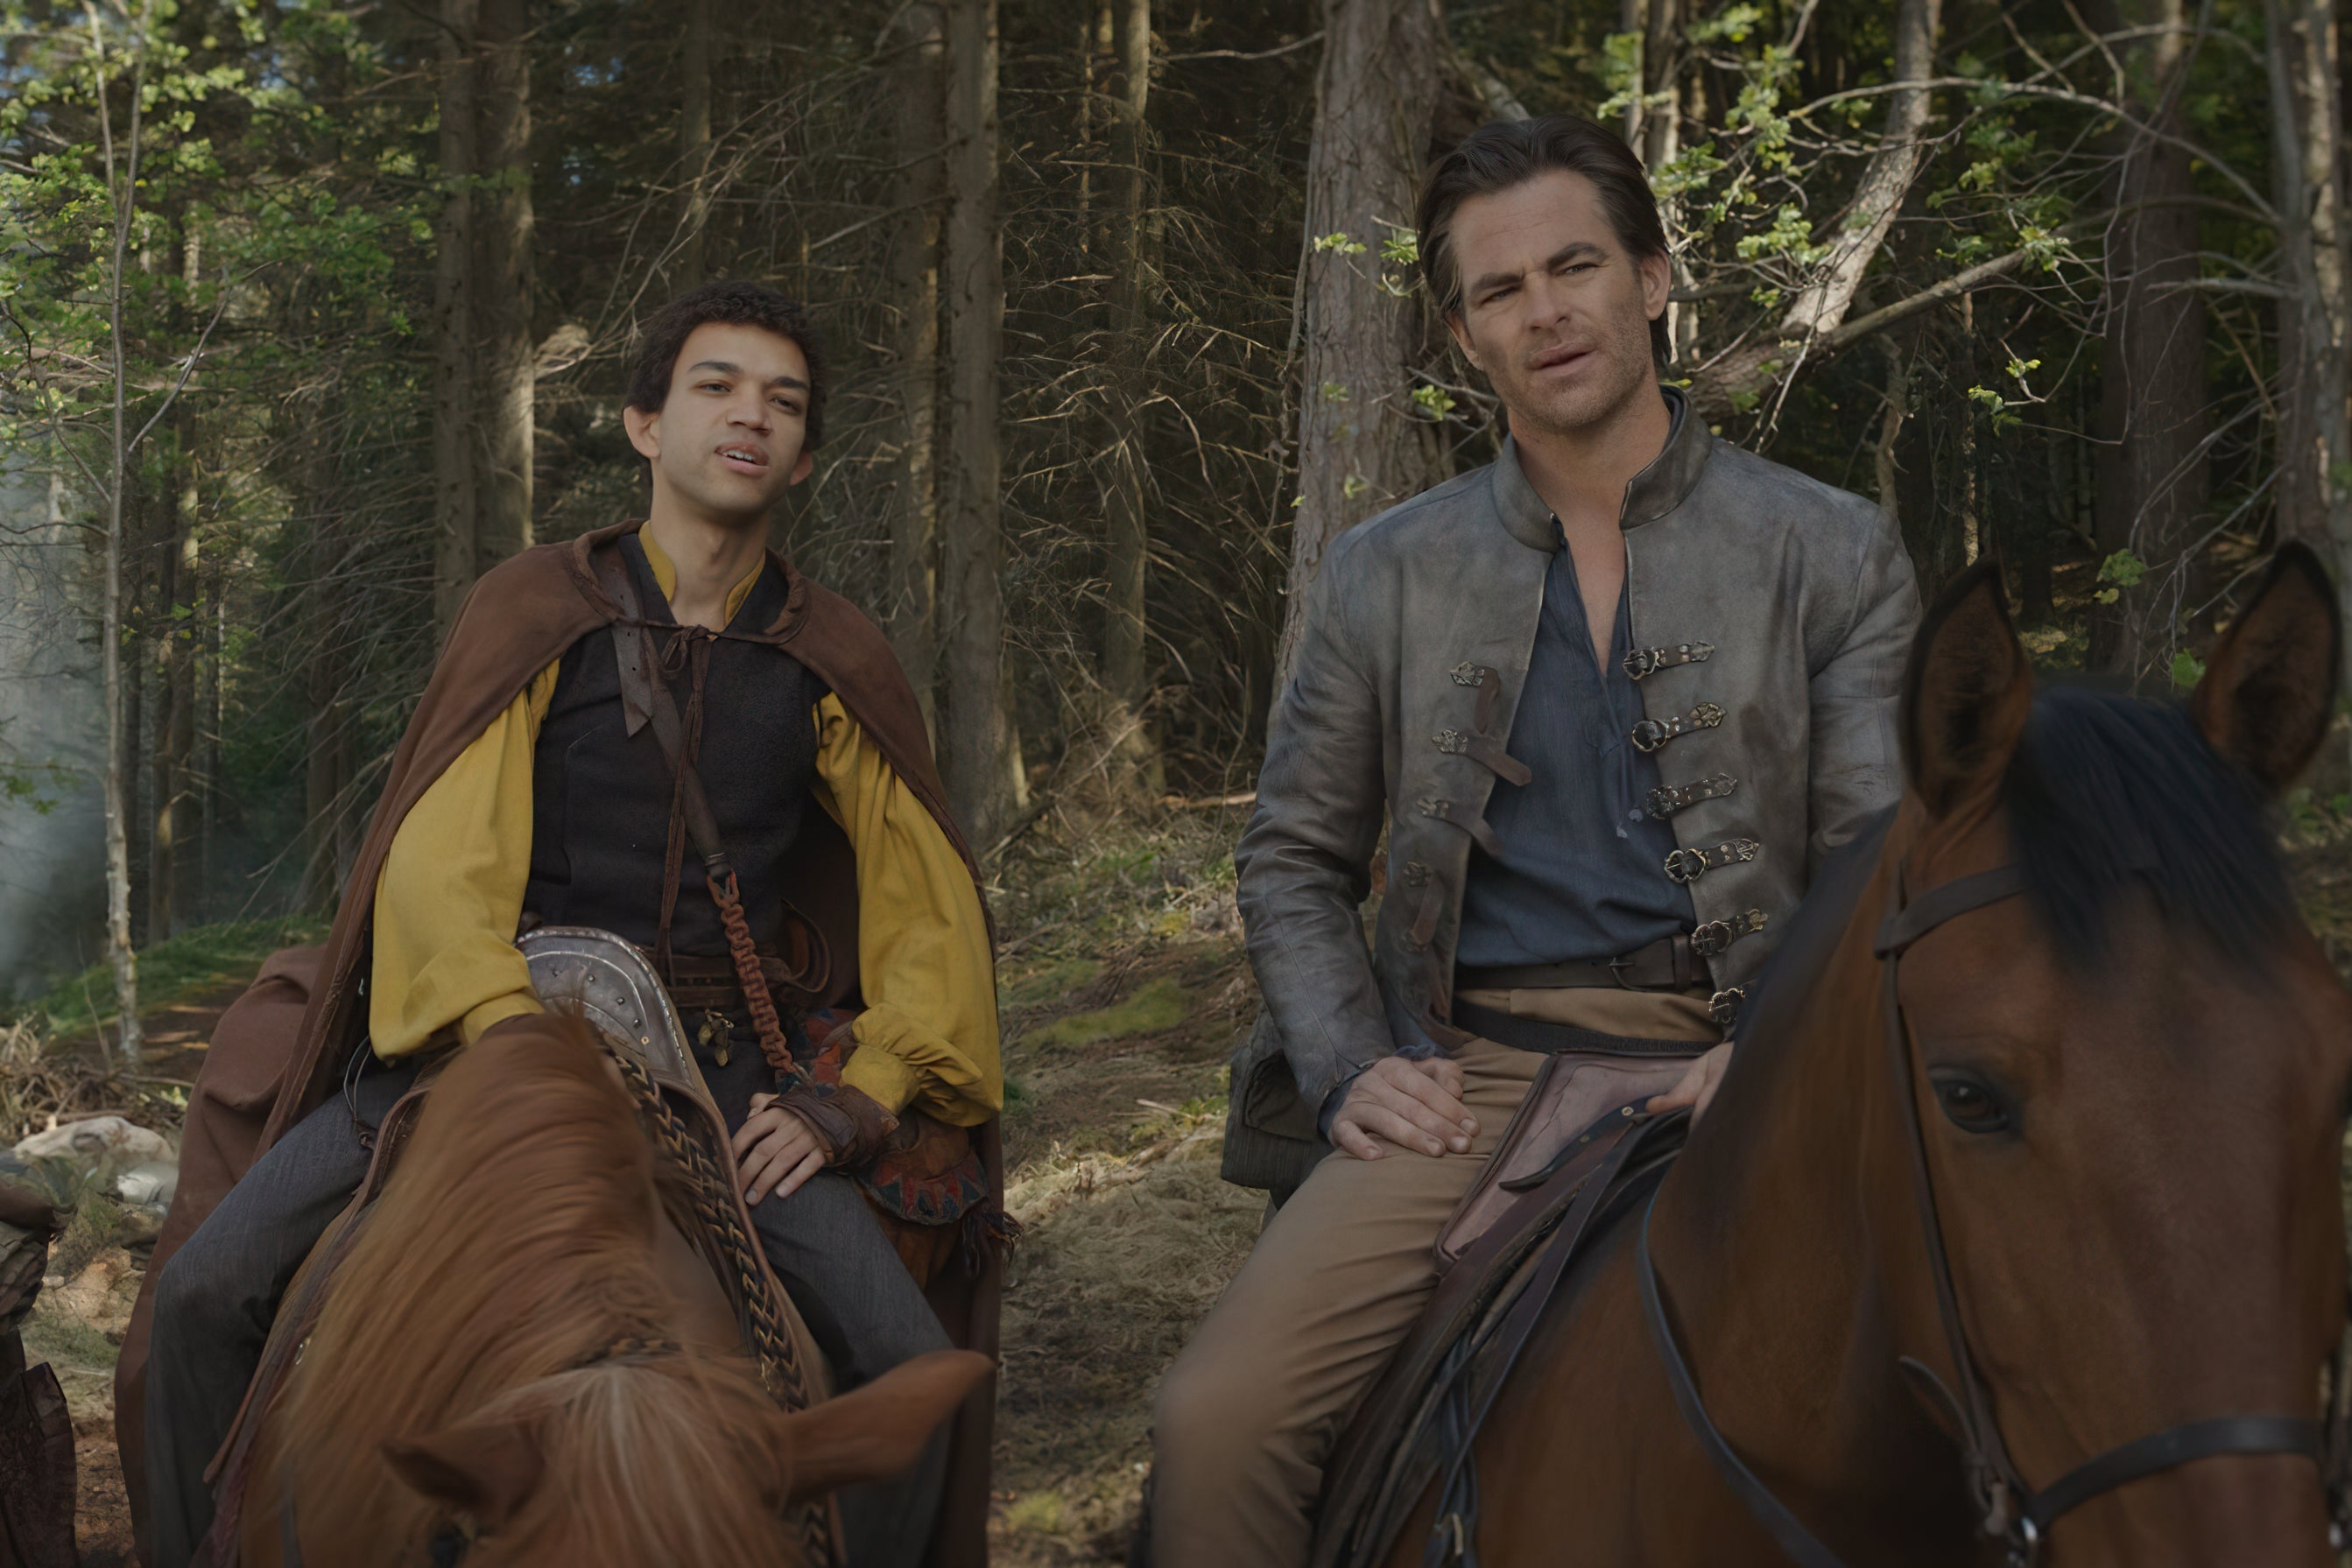 The two handsome men sit astride their noble steeds, puzzled looks on their faces